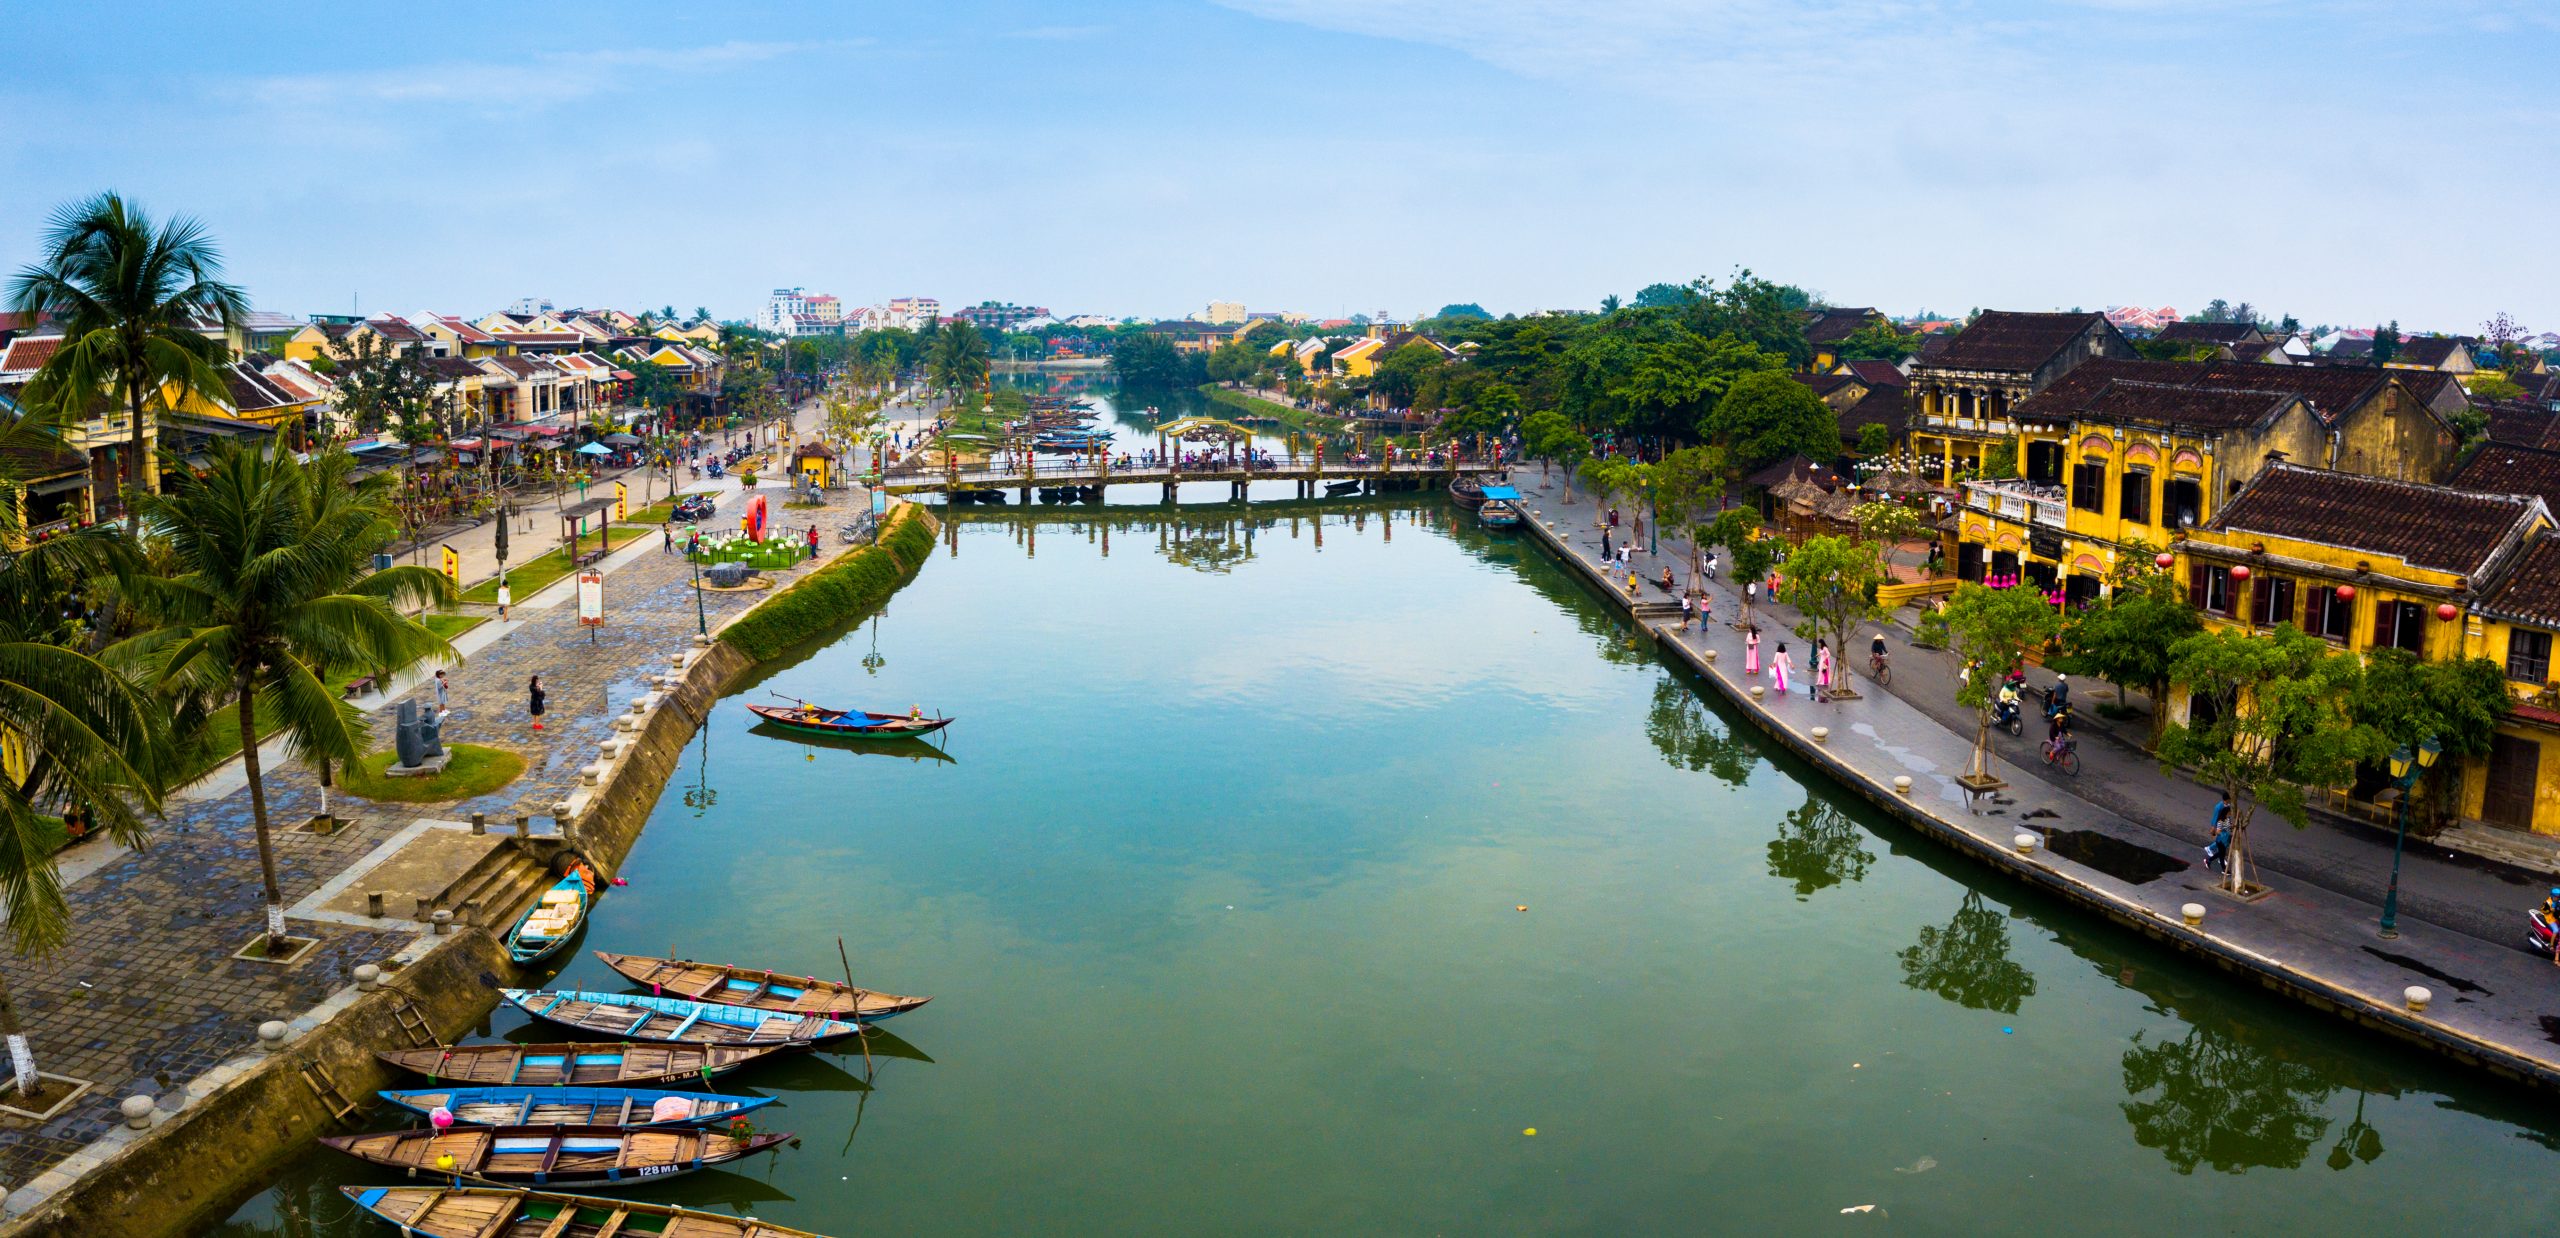 Getting From Hanoi To Hoi An